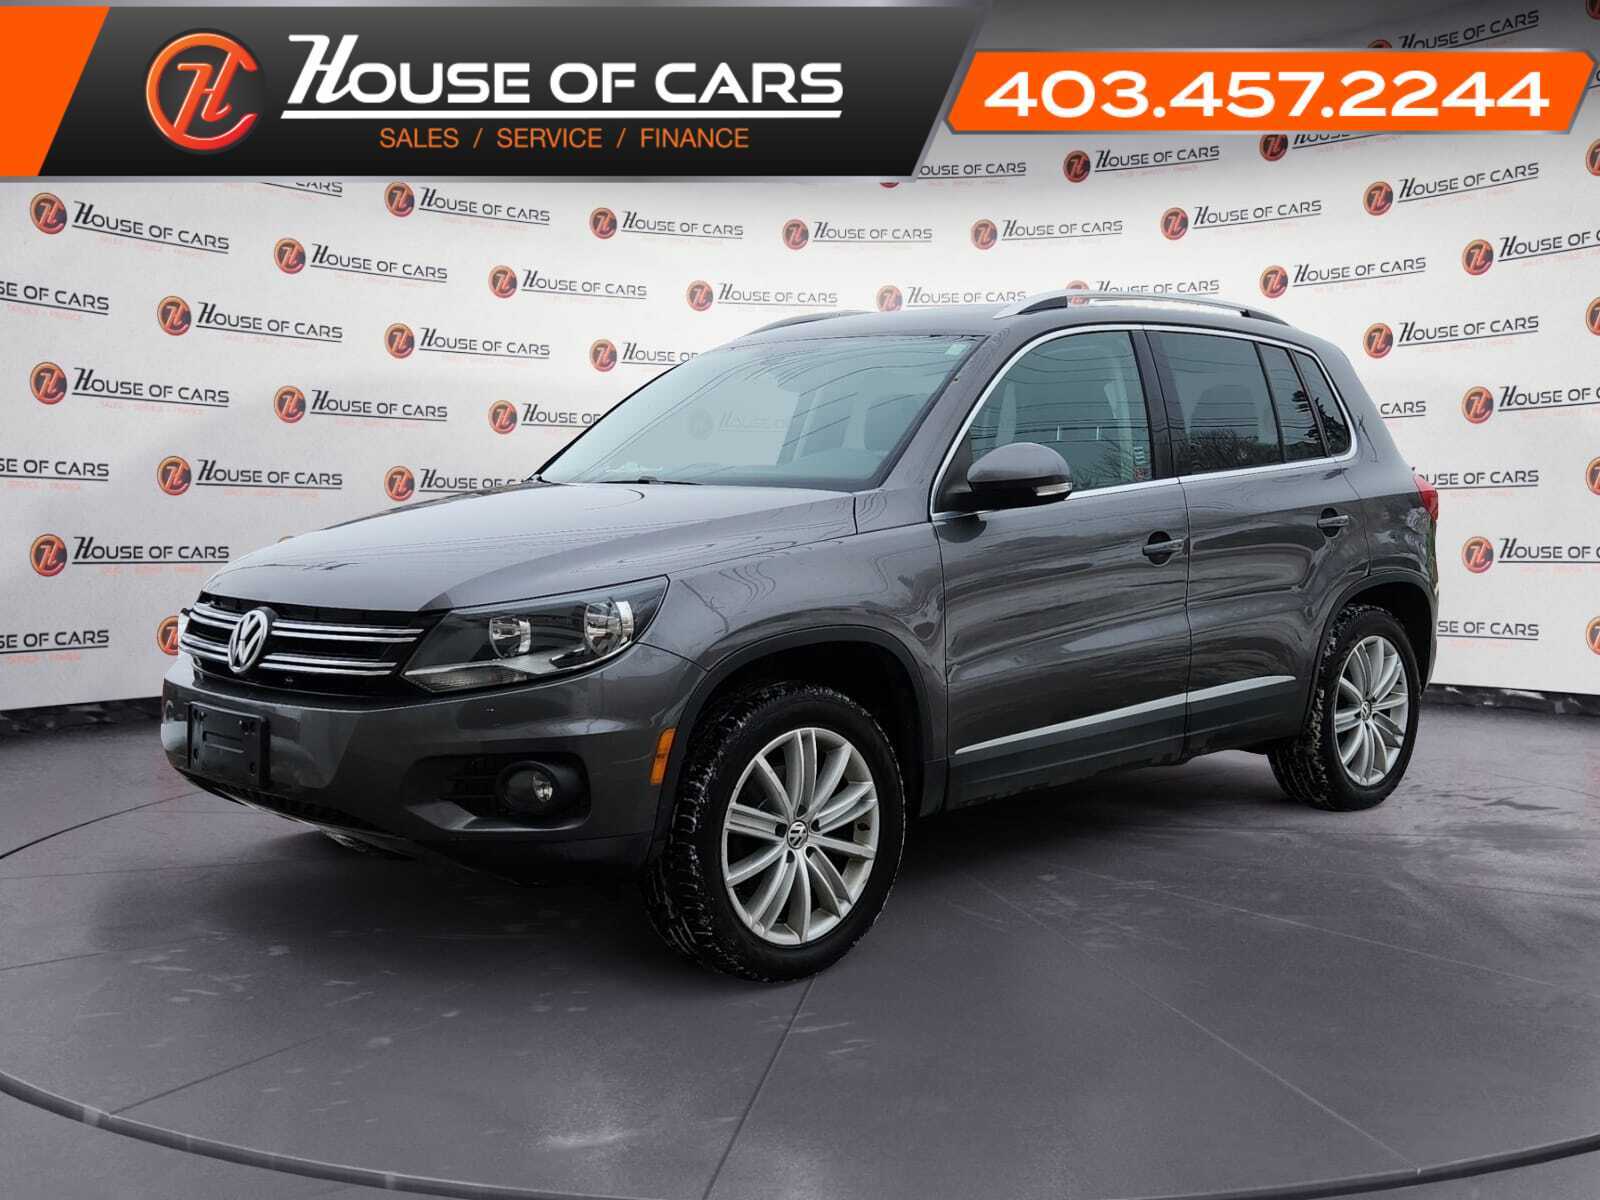 2012 Volkswagen Tiguan 4dr Auto Highline 4Motion Leather Seats 